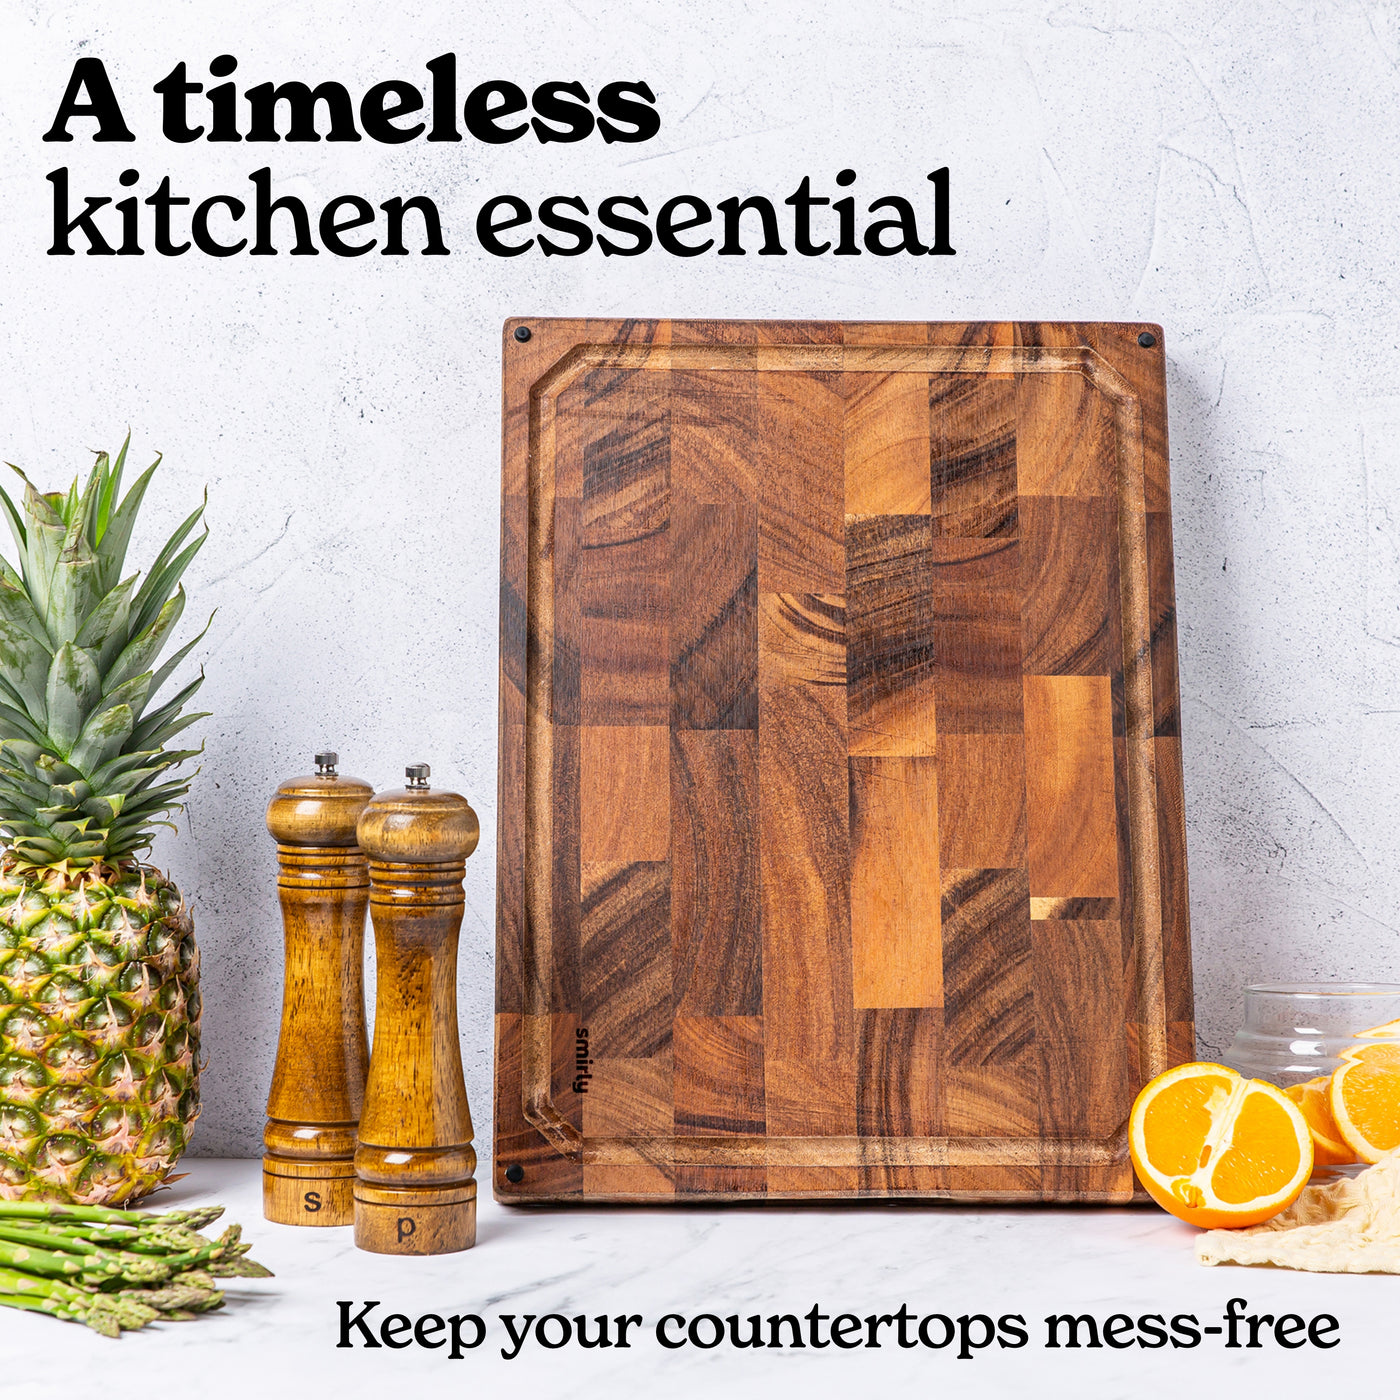 Large Bamboo Cutting Board  Buy a Bamboo Wood Cutting & Serving Board -  Smirly